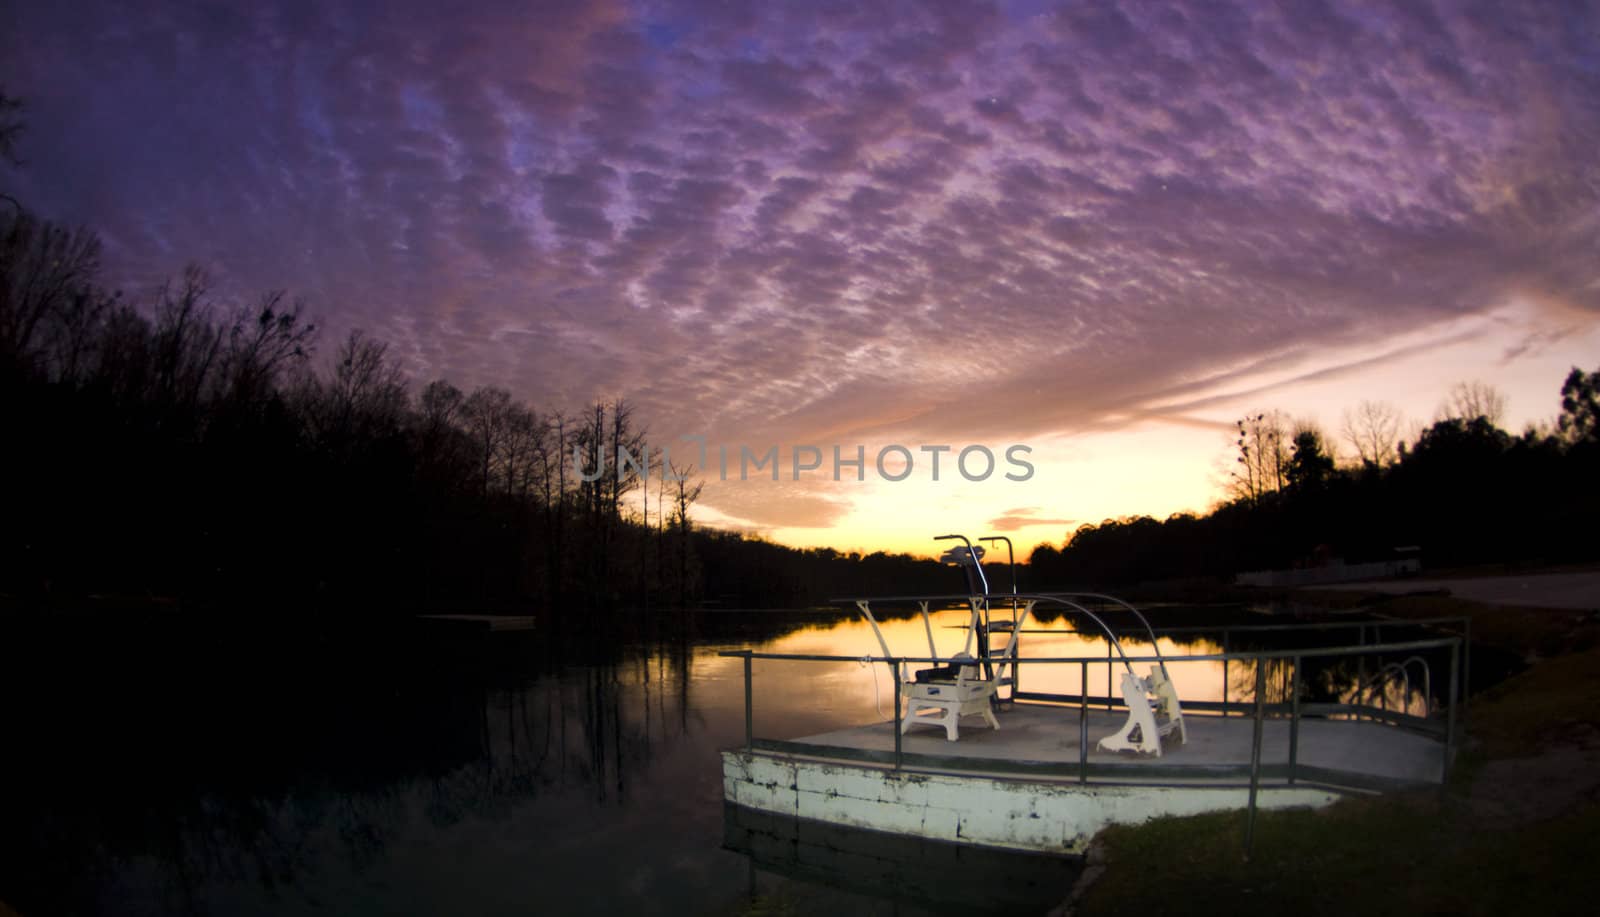 A dramatic sunset over the Jackson Blue Springs Millpond in Marianna Florida